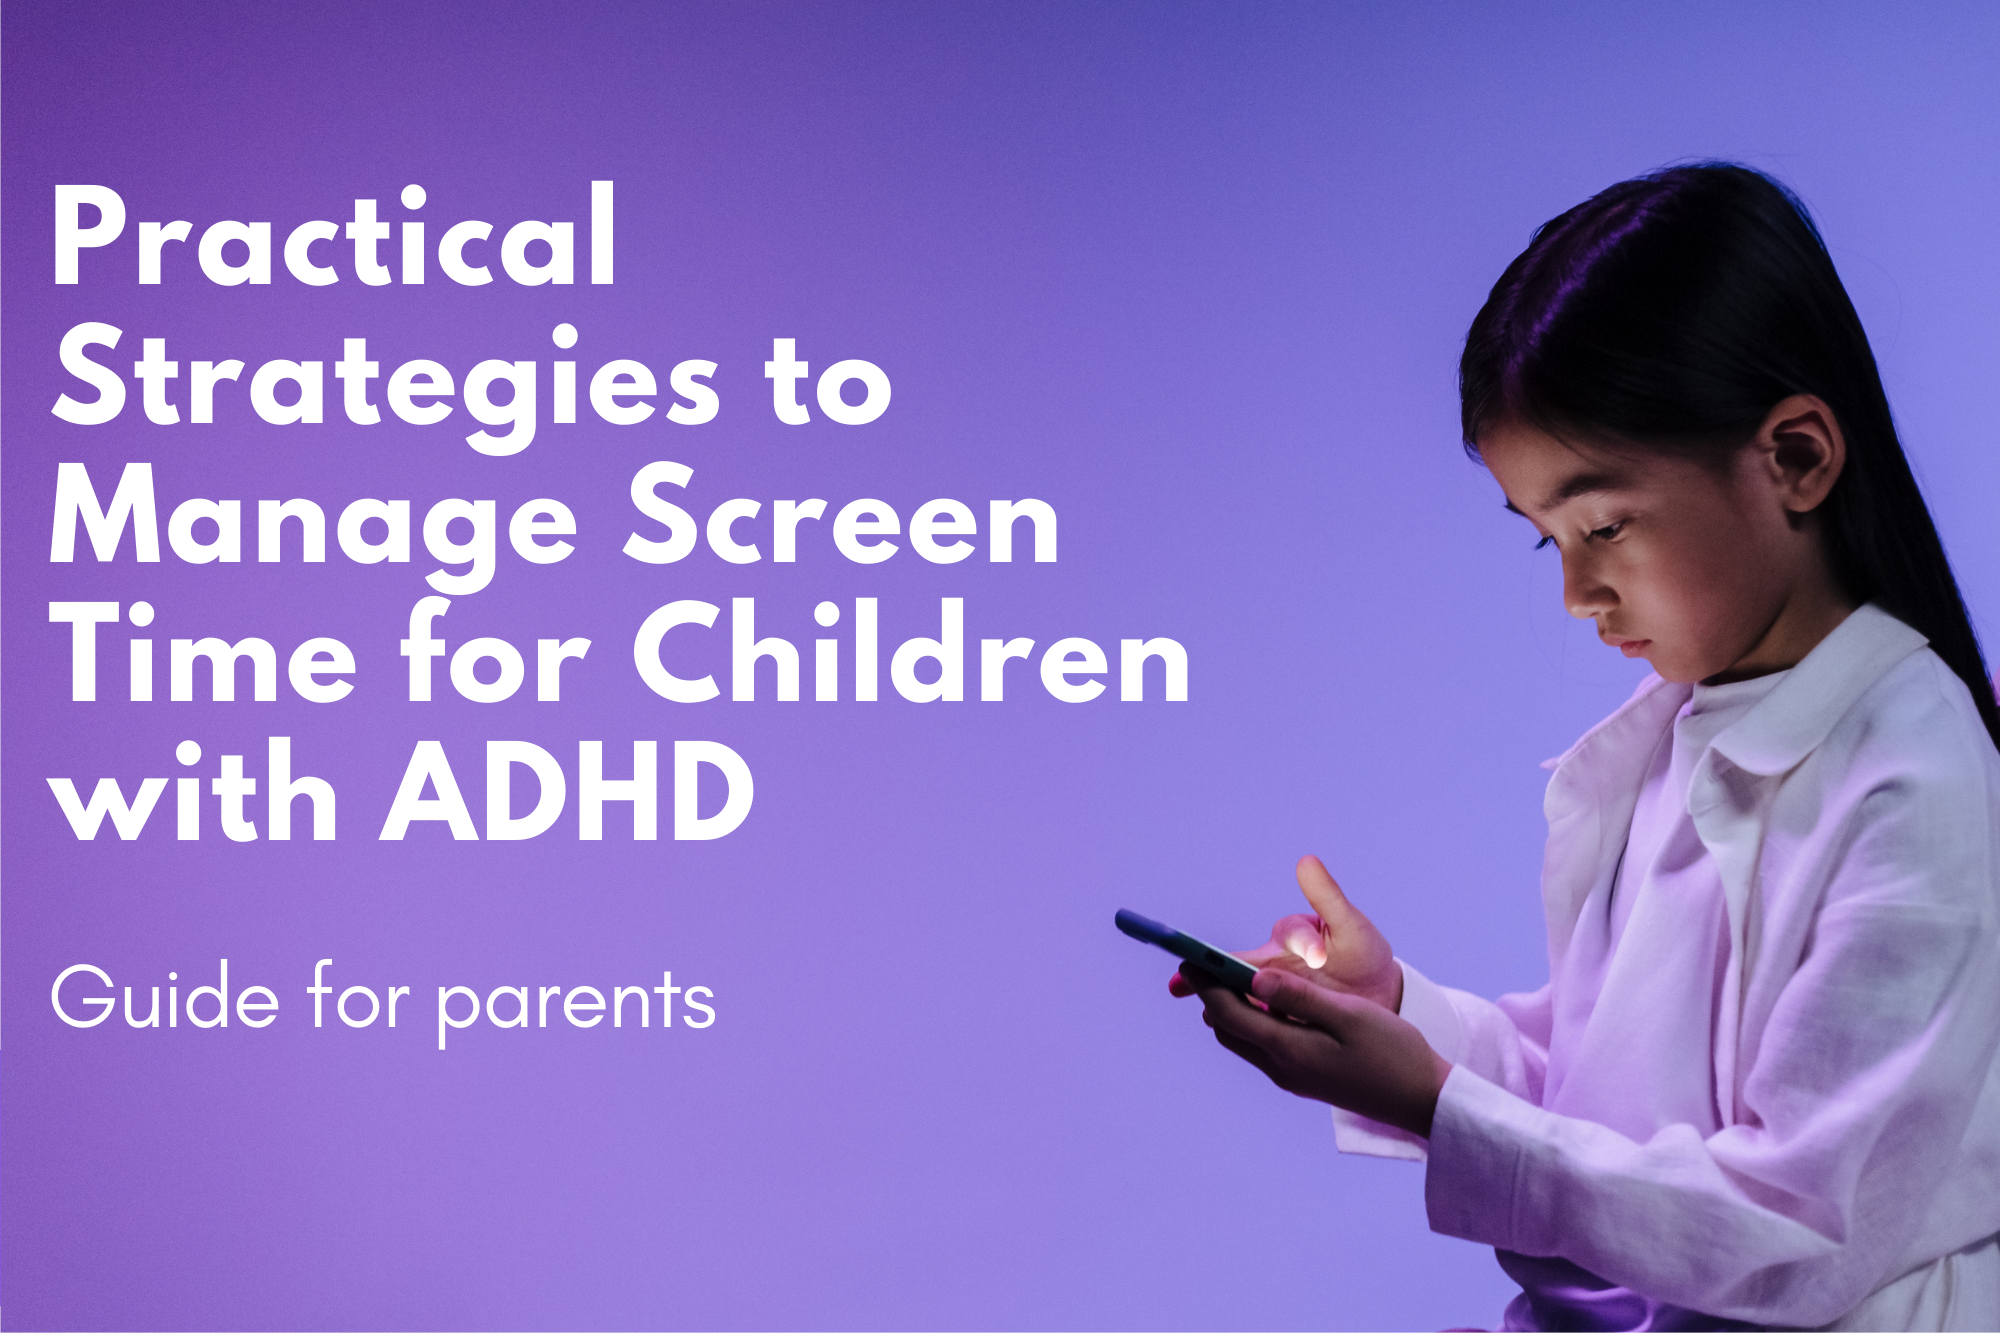 How do I manage my child's screen time with ADHD?